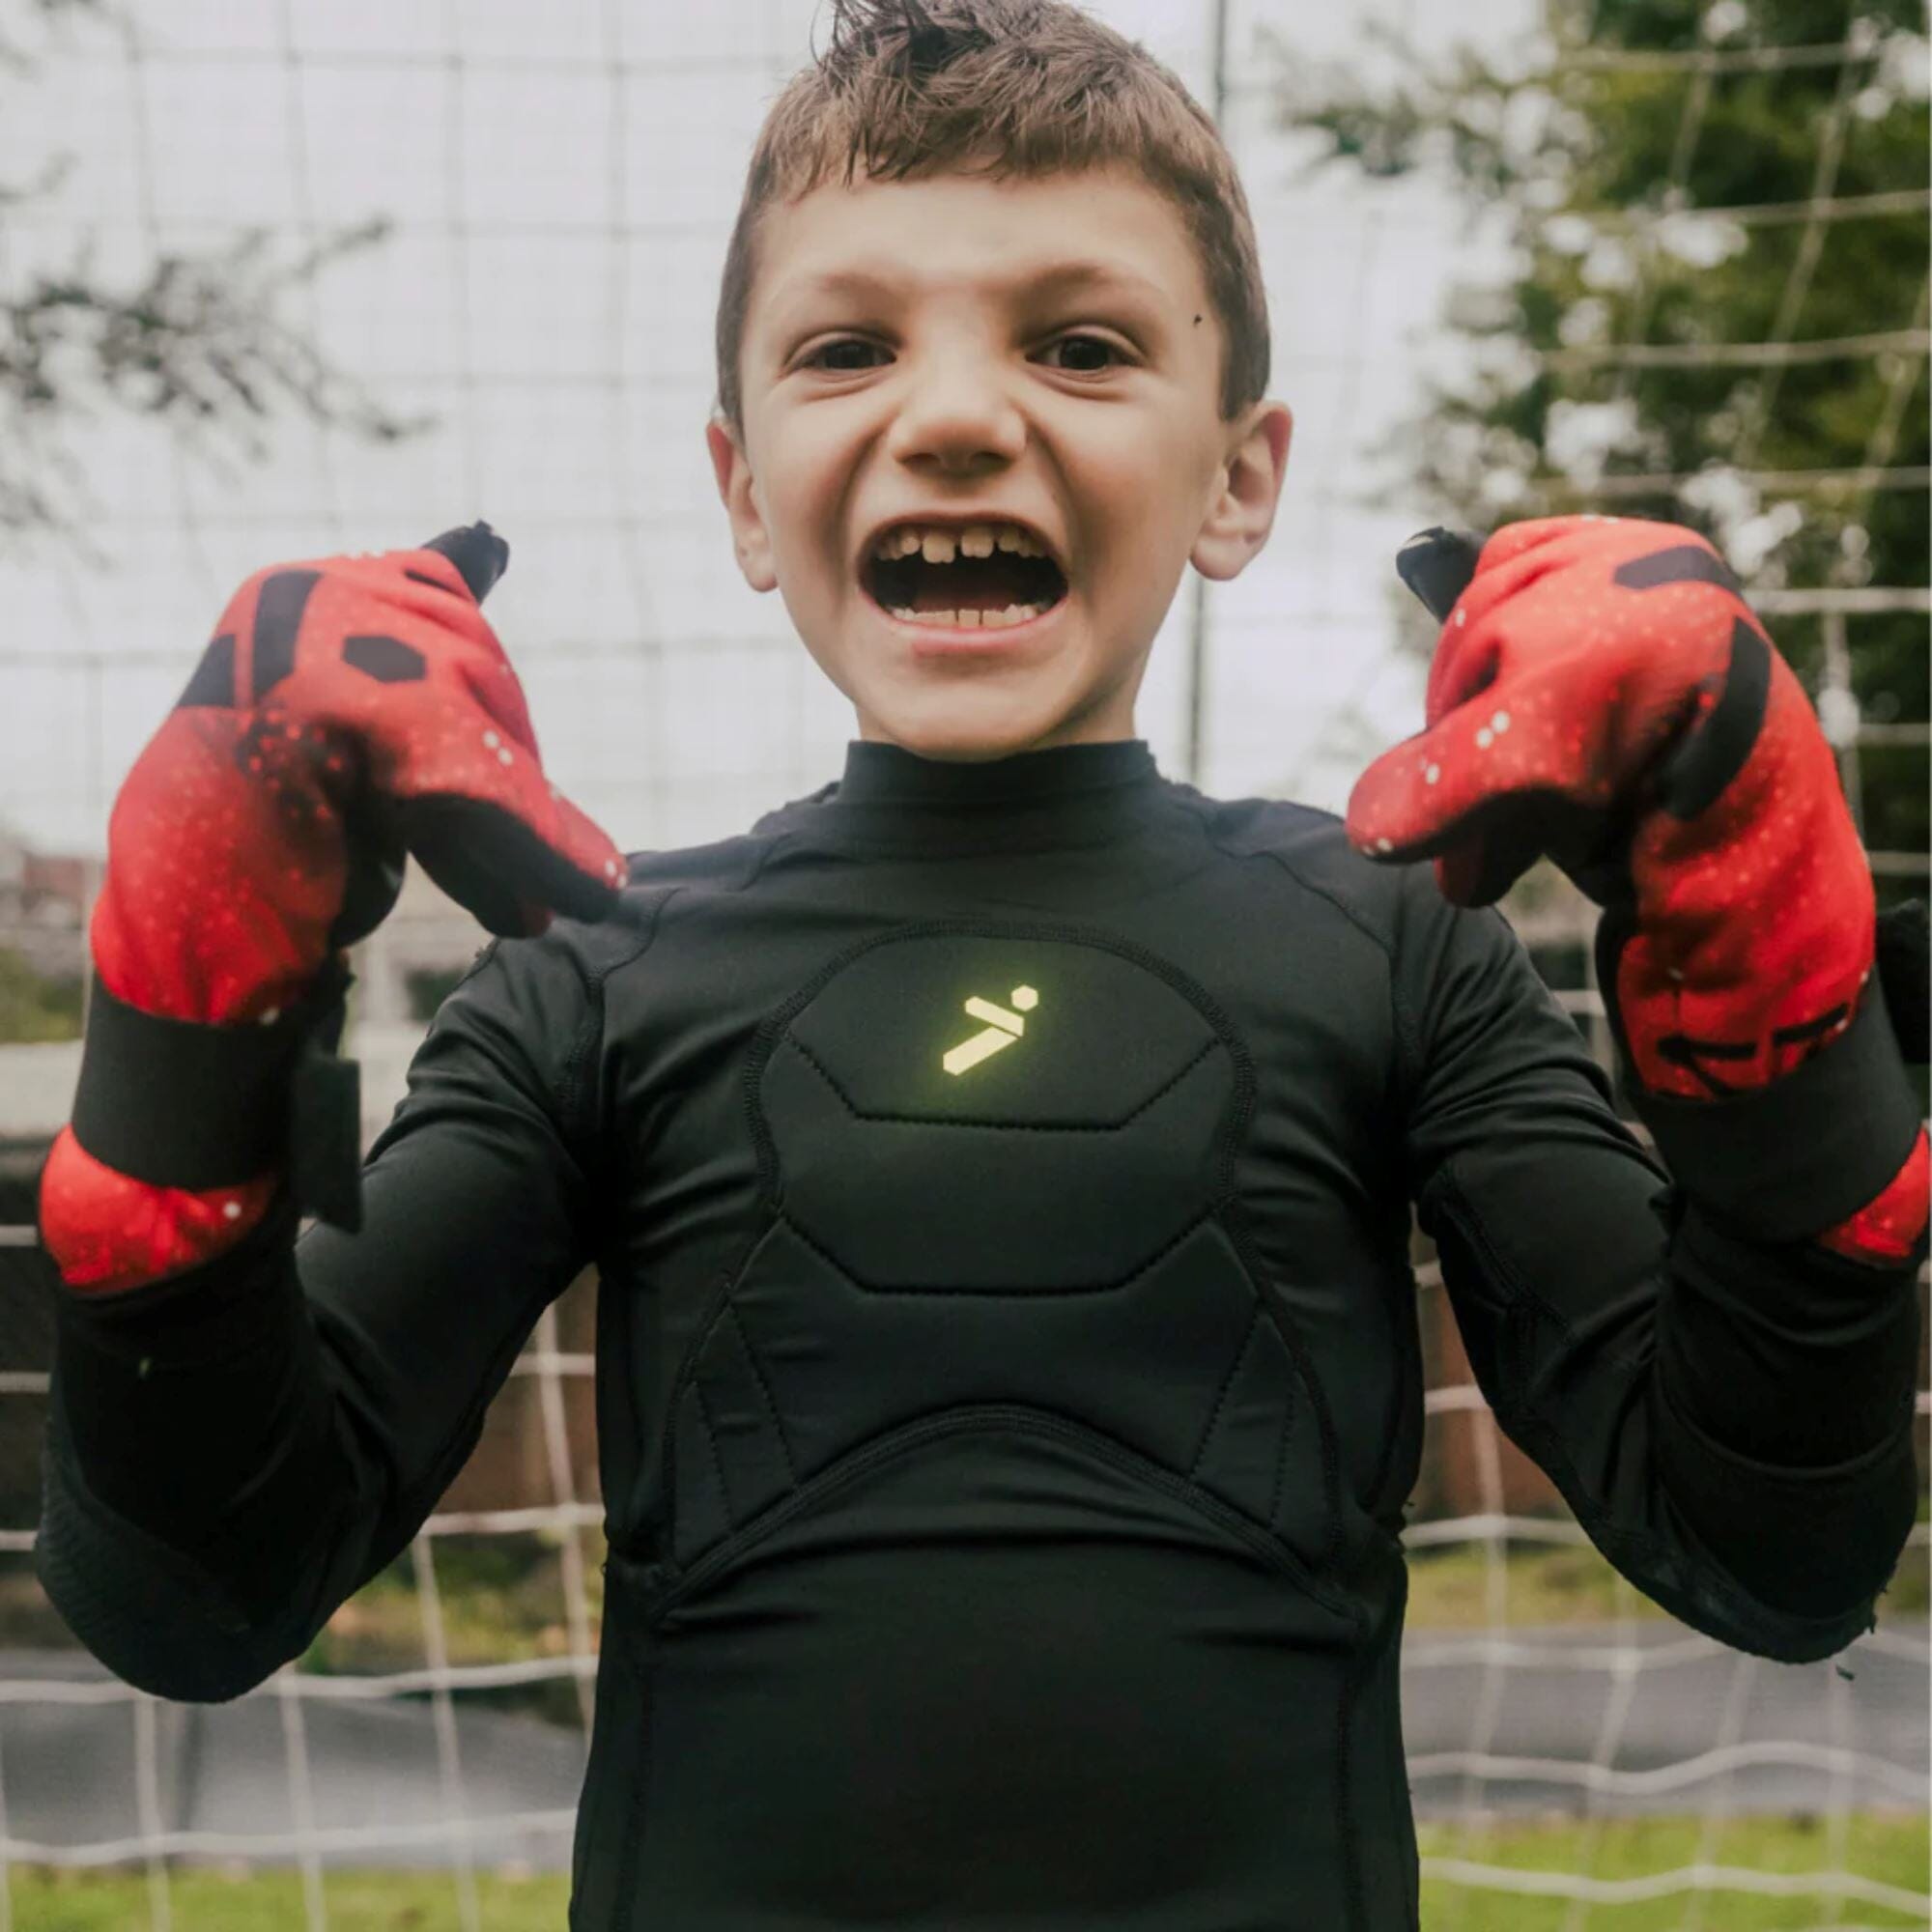 Challenger Youth GK Gloves by Storelli - Blue Circuit - ITASPORT